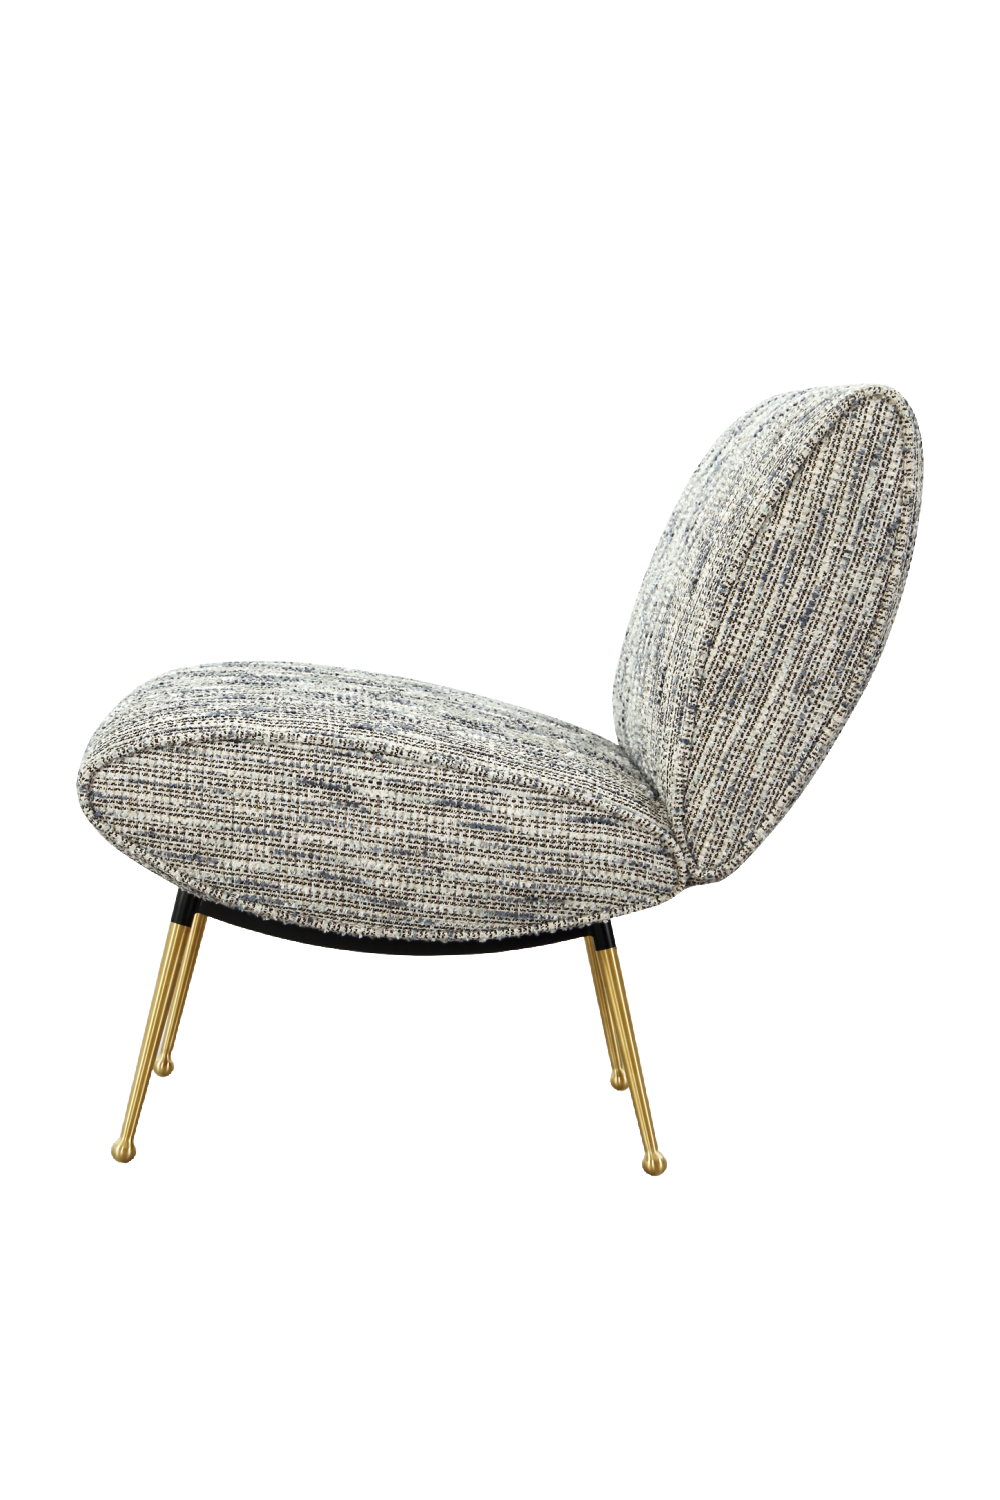 Upholstered Contemporary Occasional Chair | Liang & Eimil Oda | Oroa.com